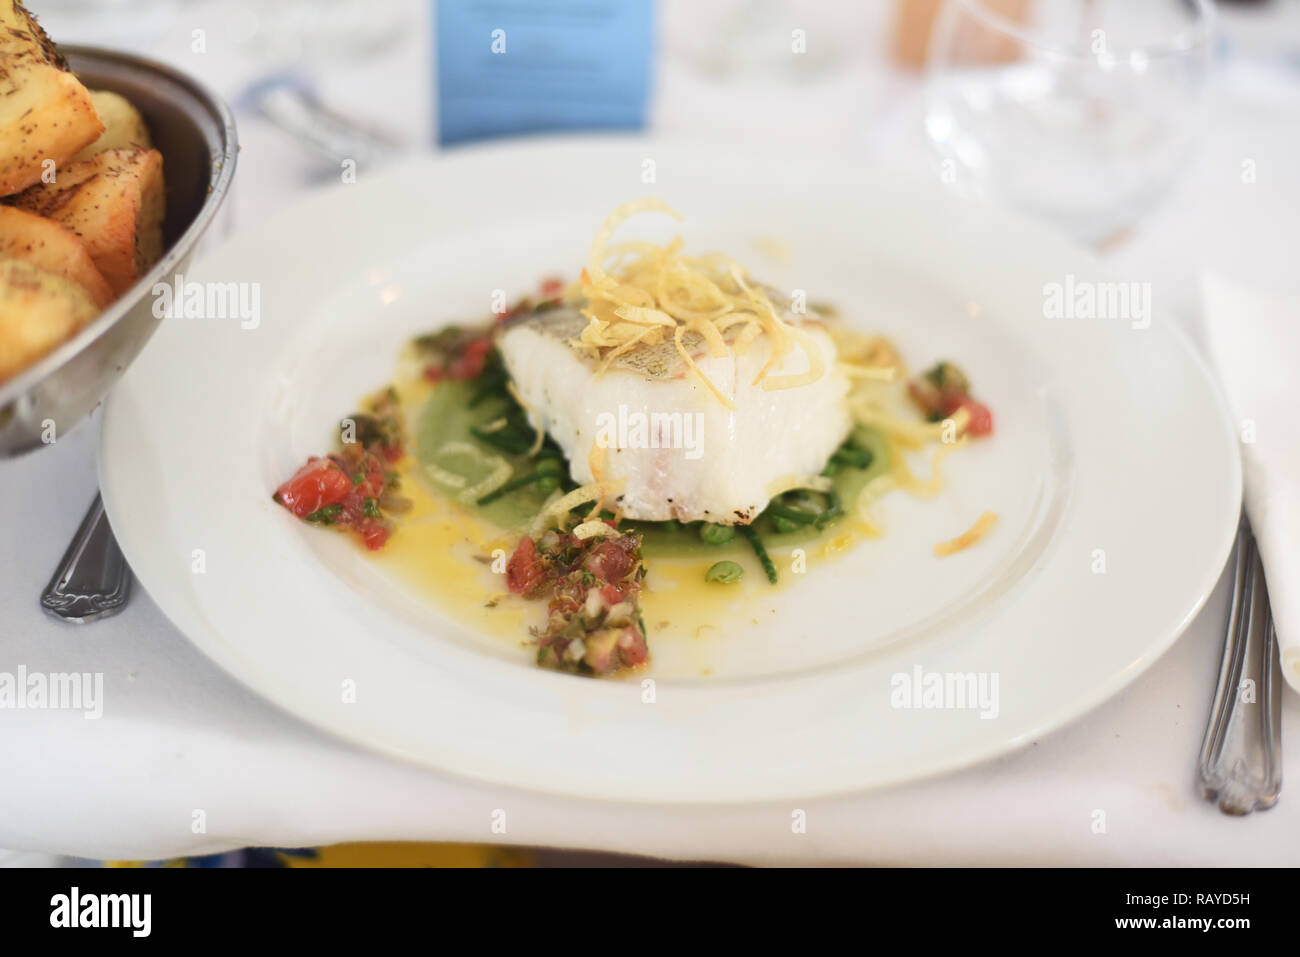 Fine dining fillet of fish main with sliced vegetable well presented a la carte meal in a table setting Stock Photo